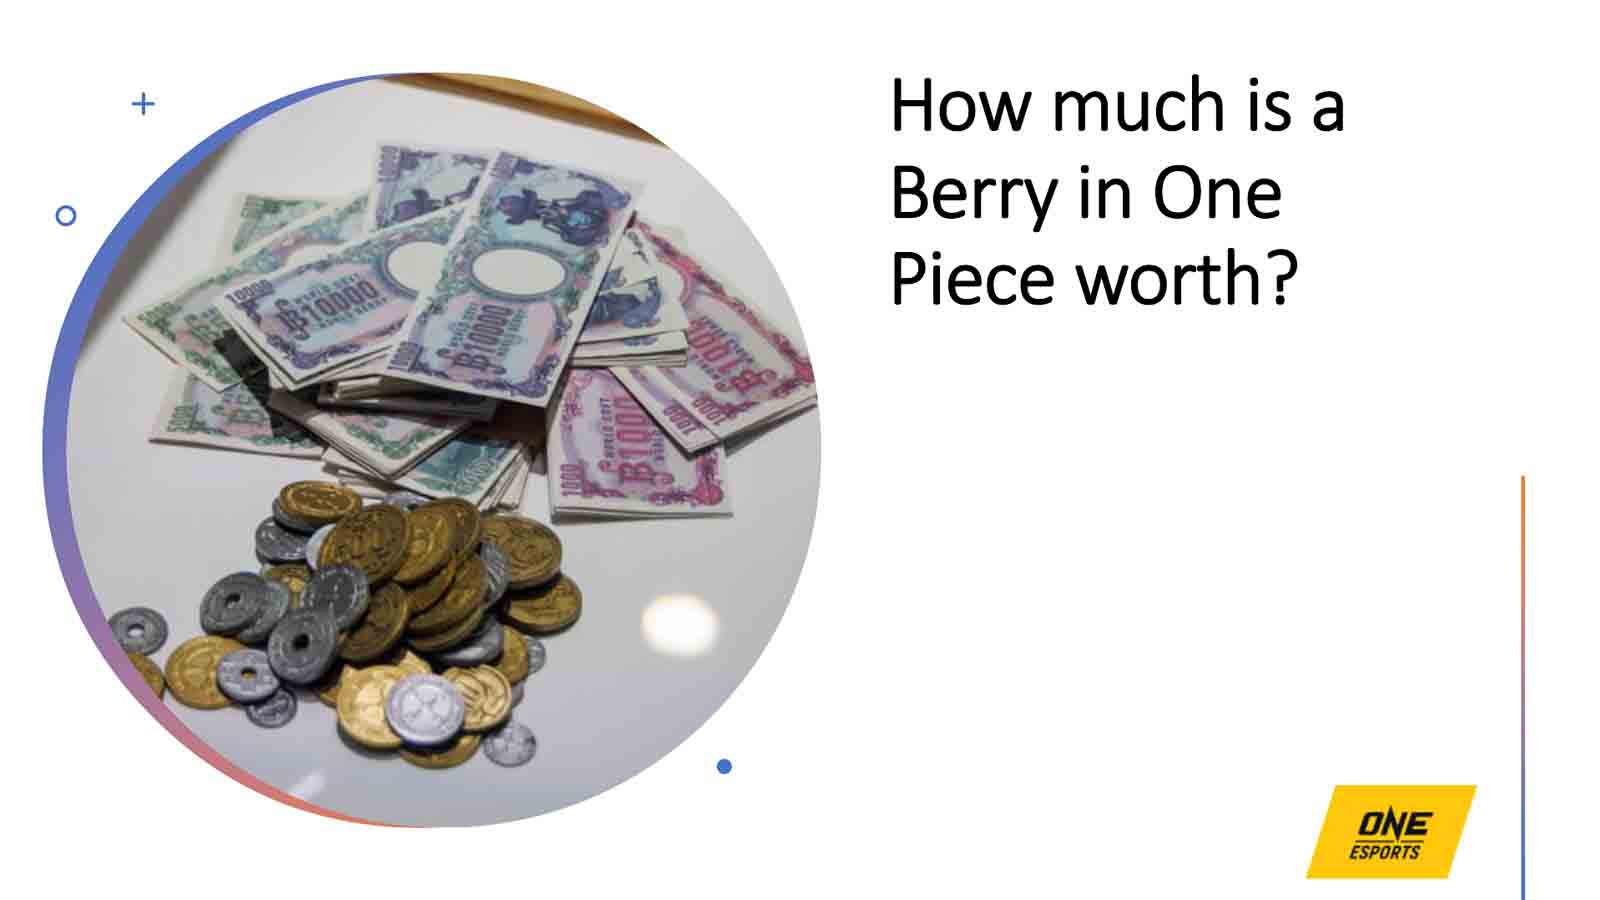 One Piece Live Action Netflix Currency Props in ONE Esports Item Suggestion Image "How much is a berry worth in One Piece?"